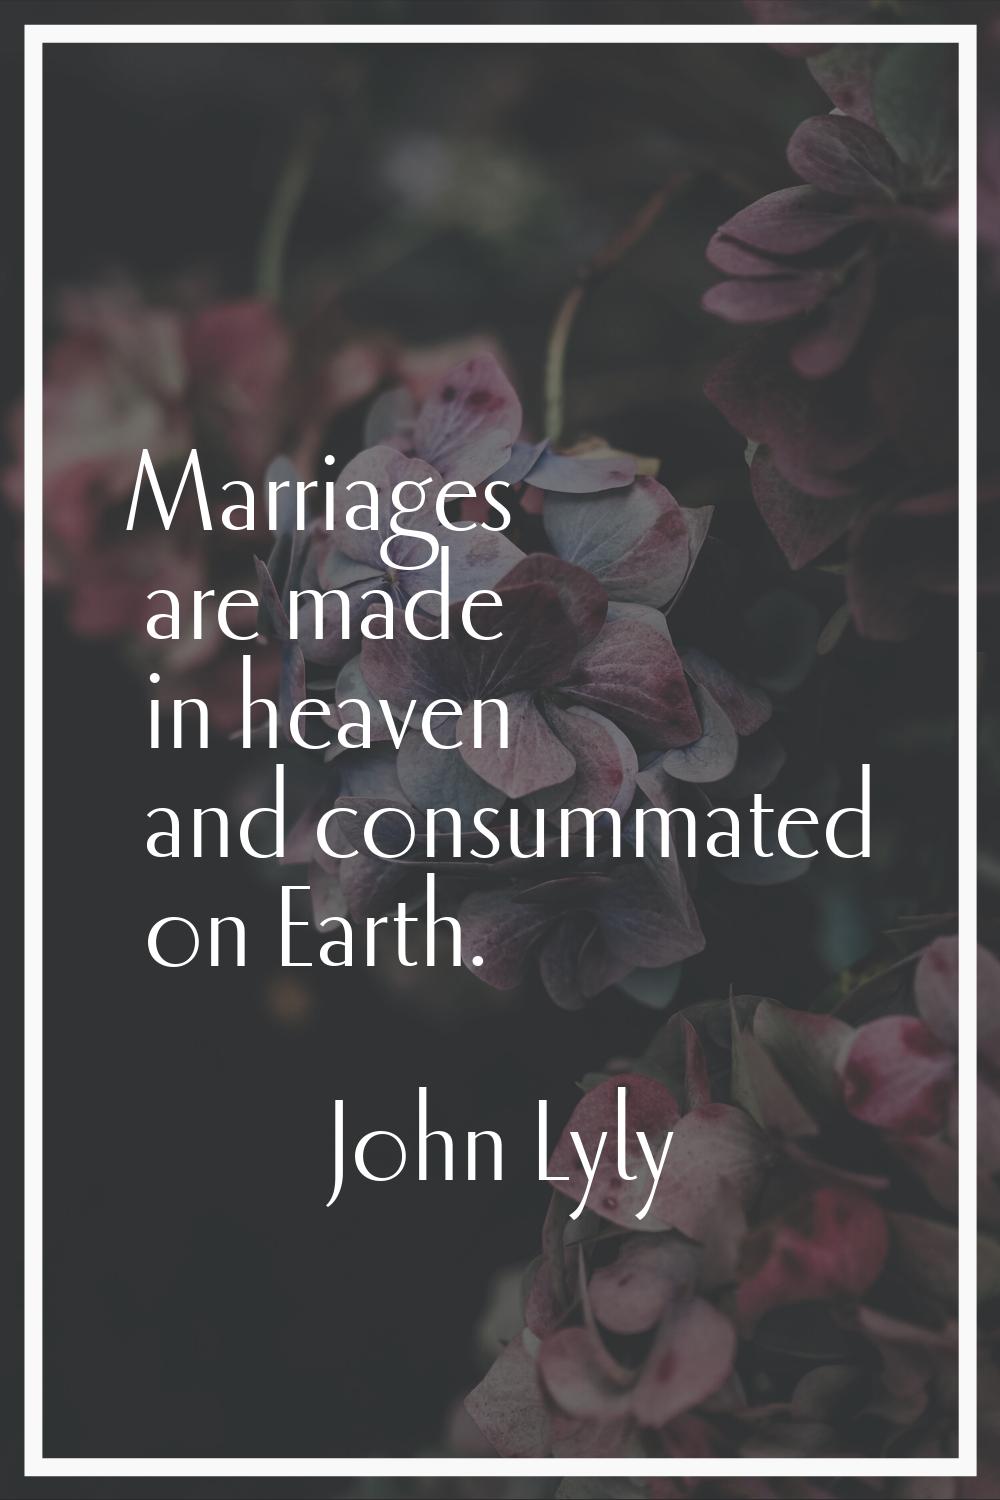 Marriages are made in heaven and consummated on Earth.